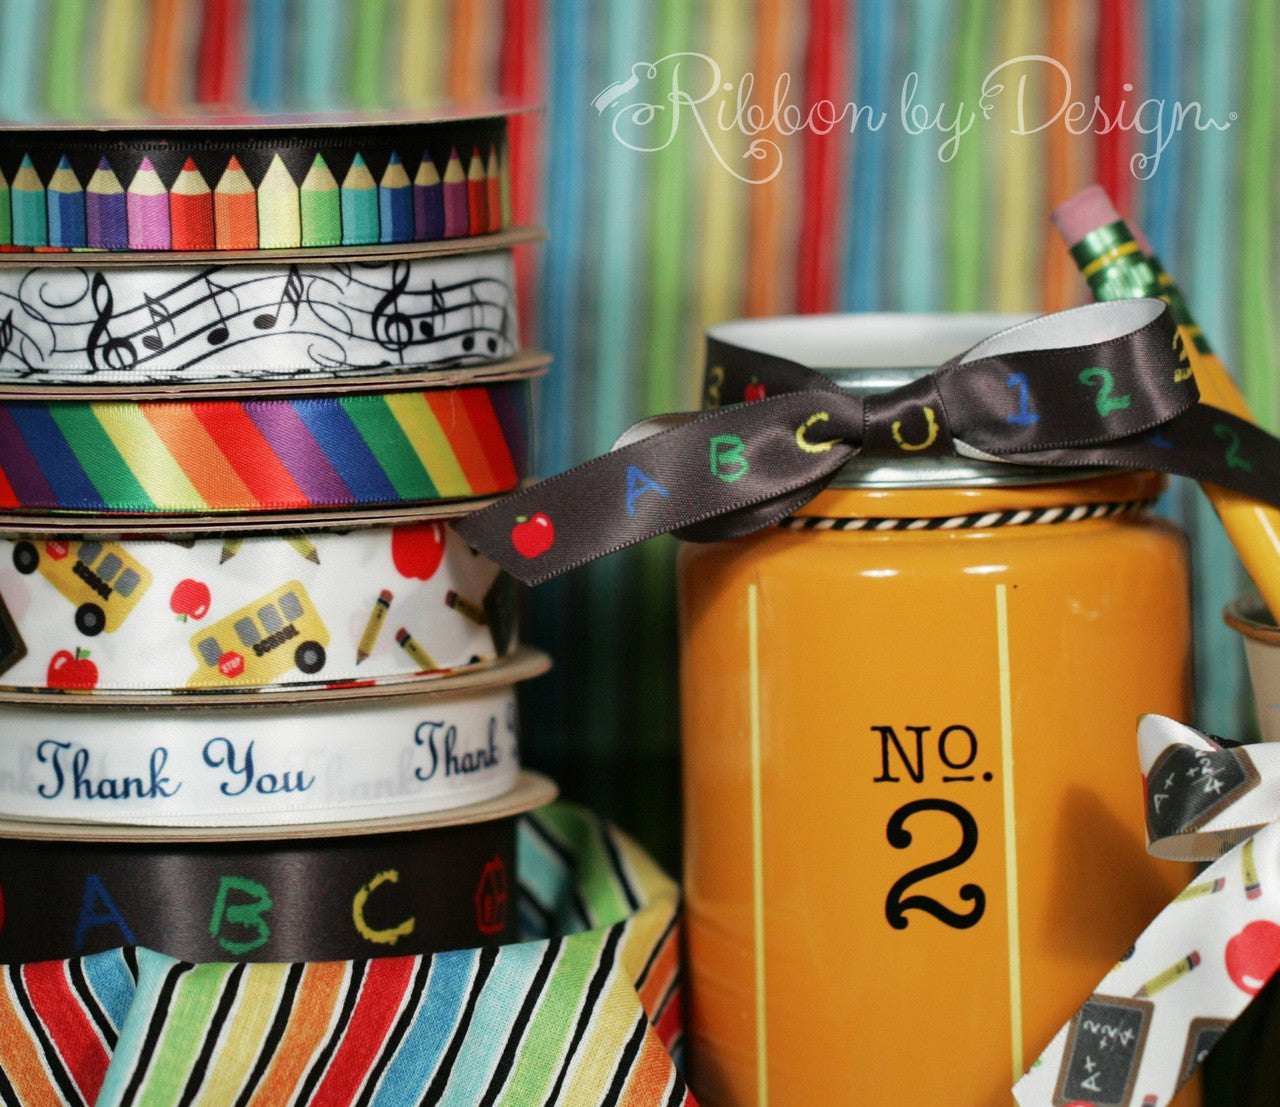 Our colored pencil ribbon is a fabulous addition to our school collection! Designed and printed in the USA